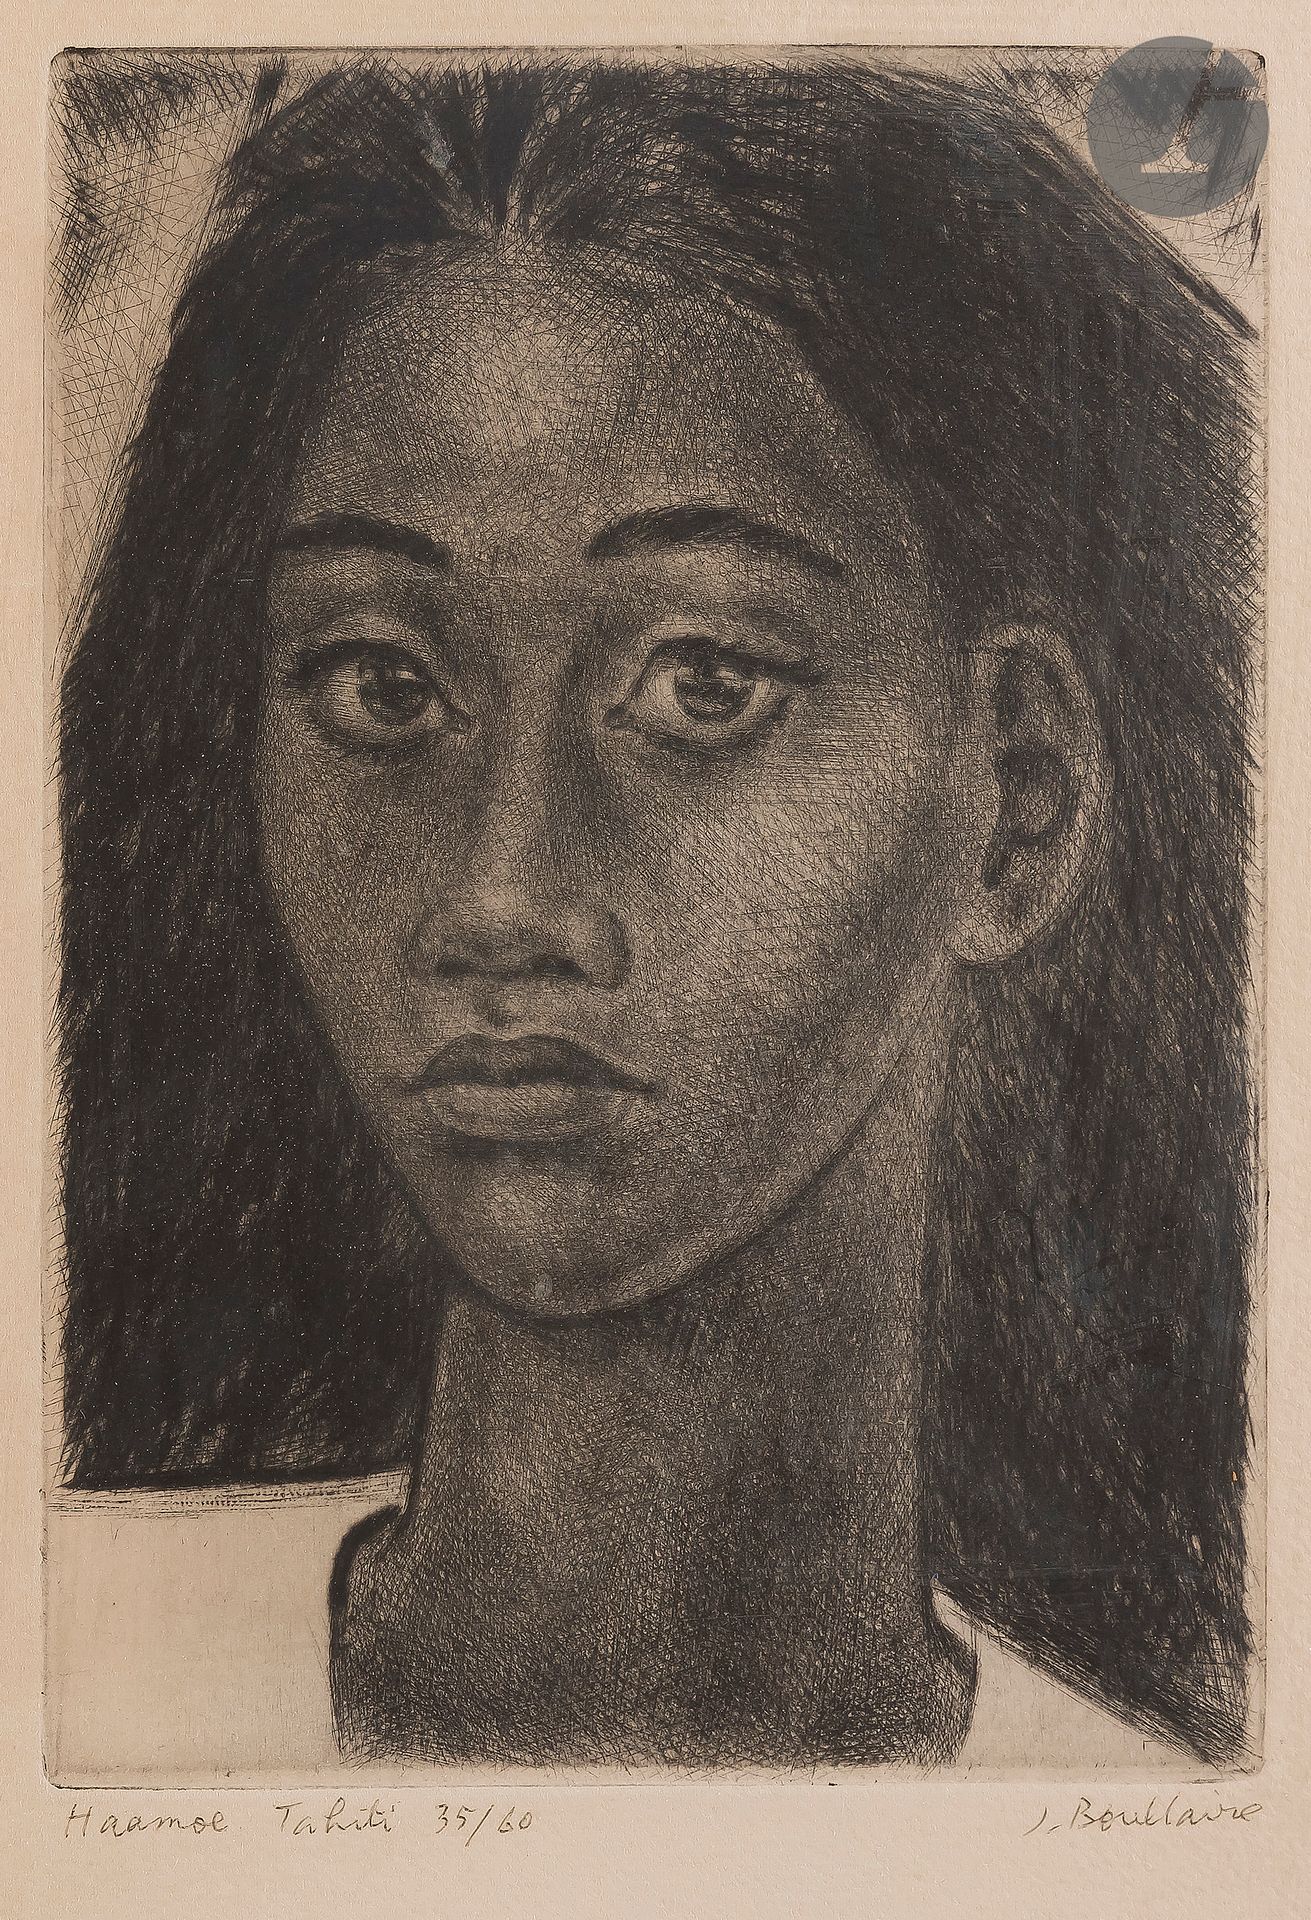 Null Jacques Boullaire (1893-1976) 

Haamoe Tahiti. About 1950-1960. Drypoint. 1&hellip;